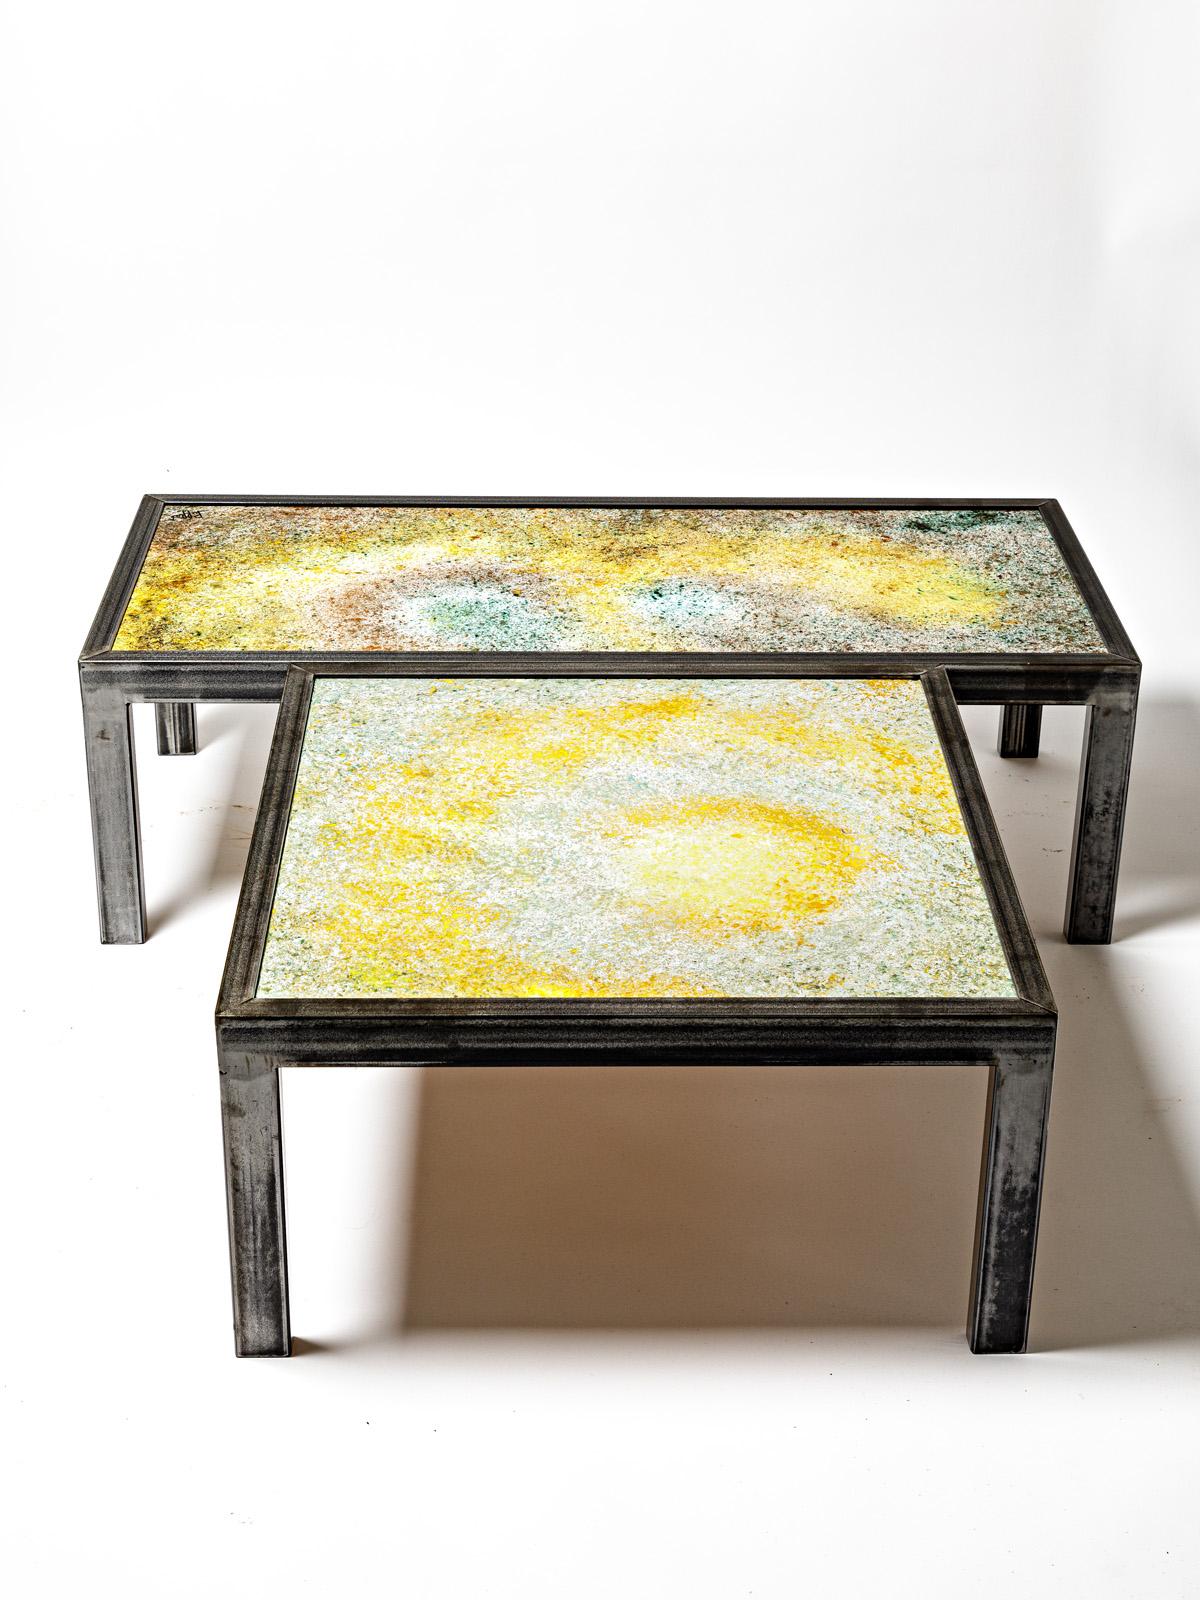 Set of 3 Large 20th Century Colored Ceramic Low Tables by Bernard Buffat 1970 For Sale 10